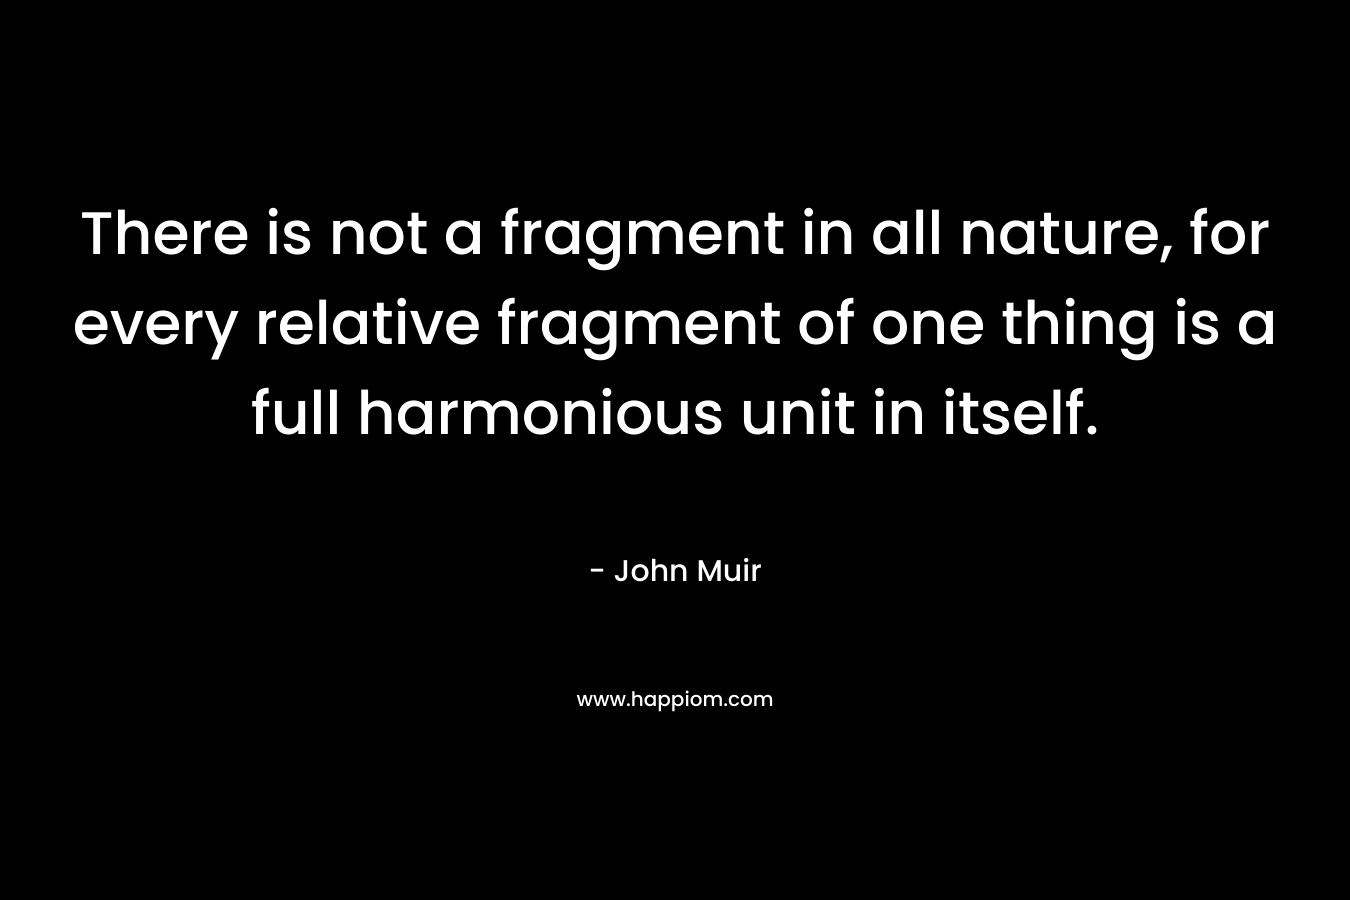 There is not a fragment in all nature, for every relative fragment of one thing is a full harmonious unit in itself. – John Muir